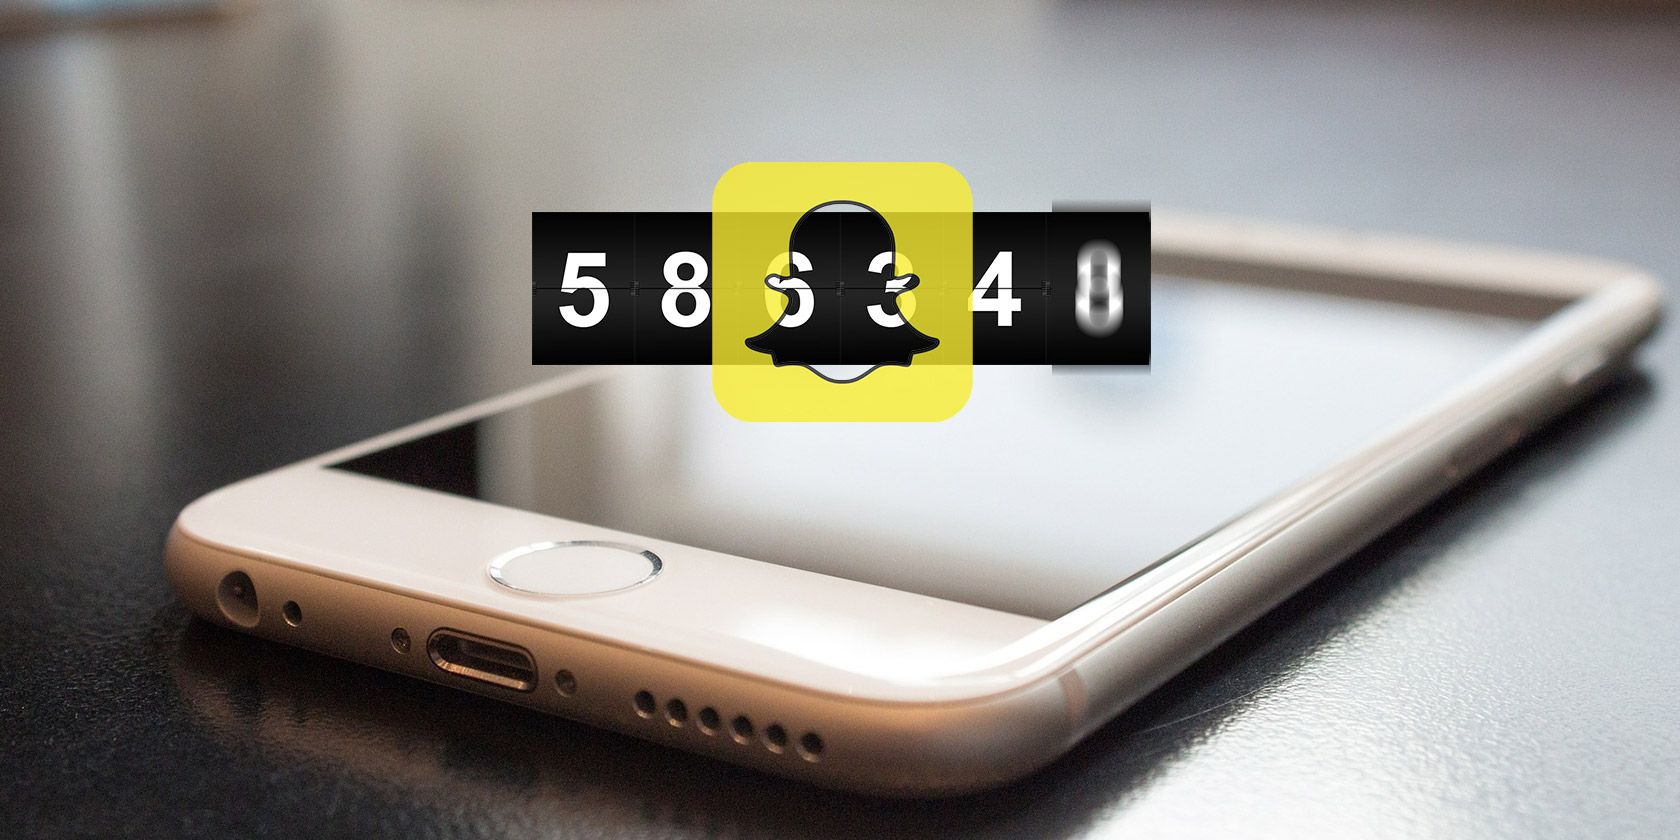 mobile phone with snapchat logo and counter